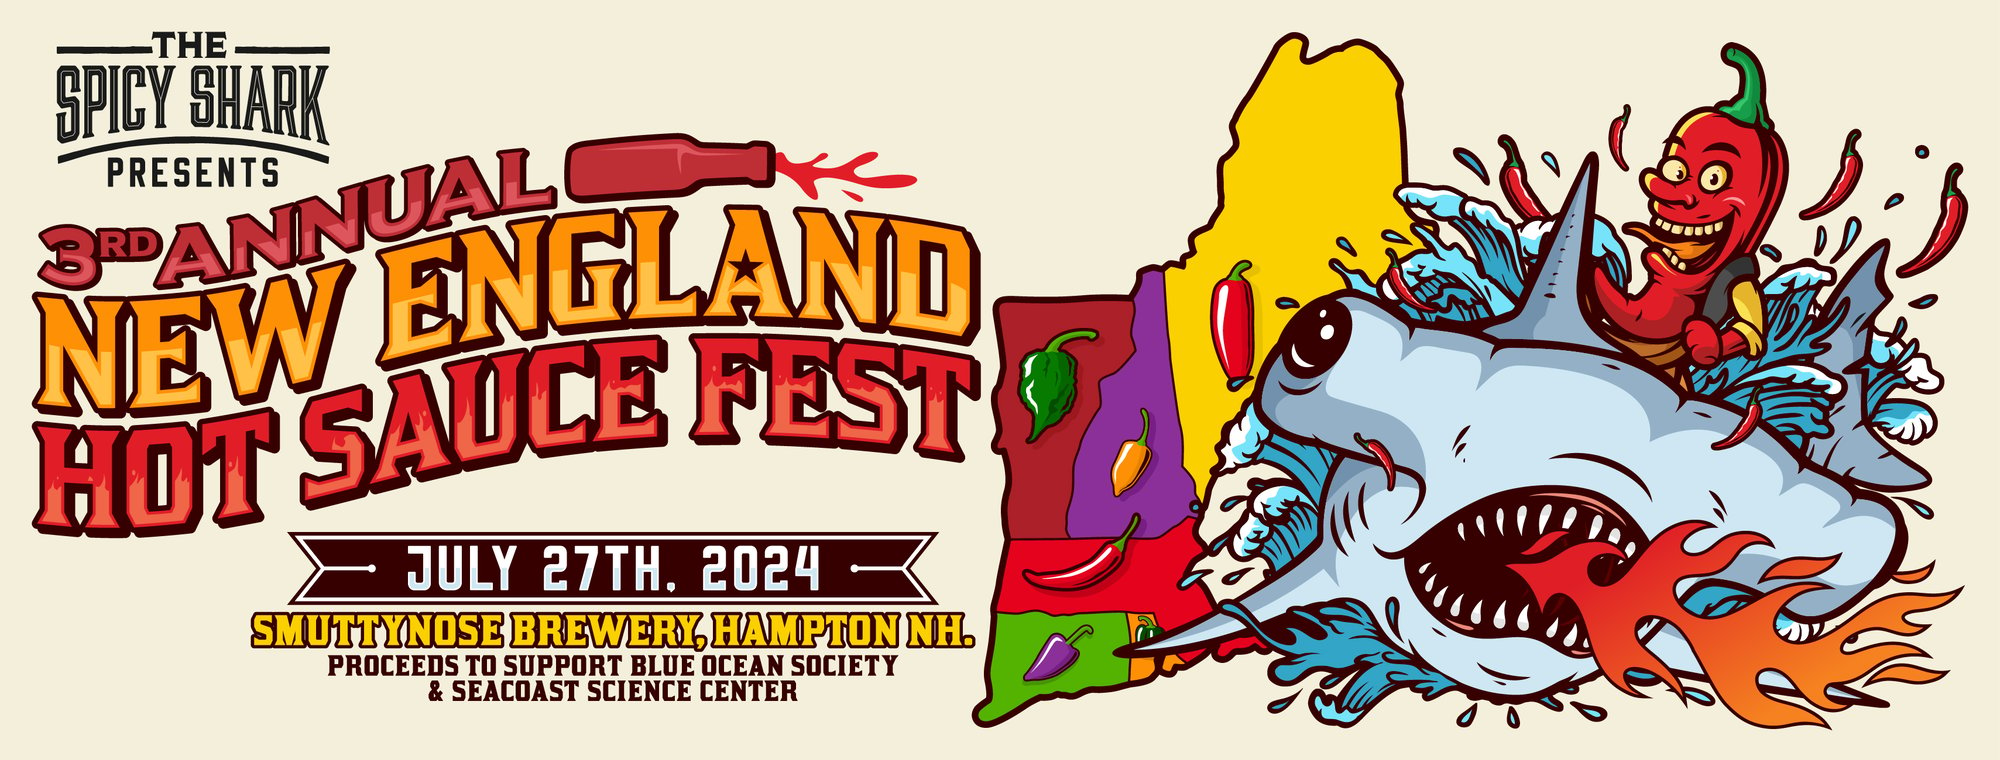 3 RD - New England Hot Sauce Fest - Facebook Cover